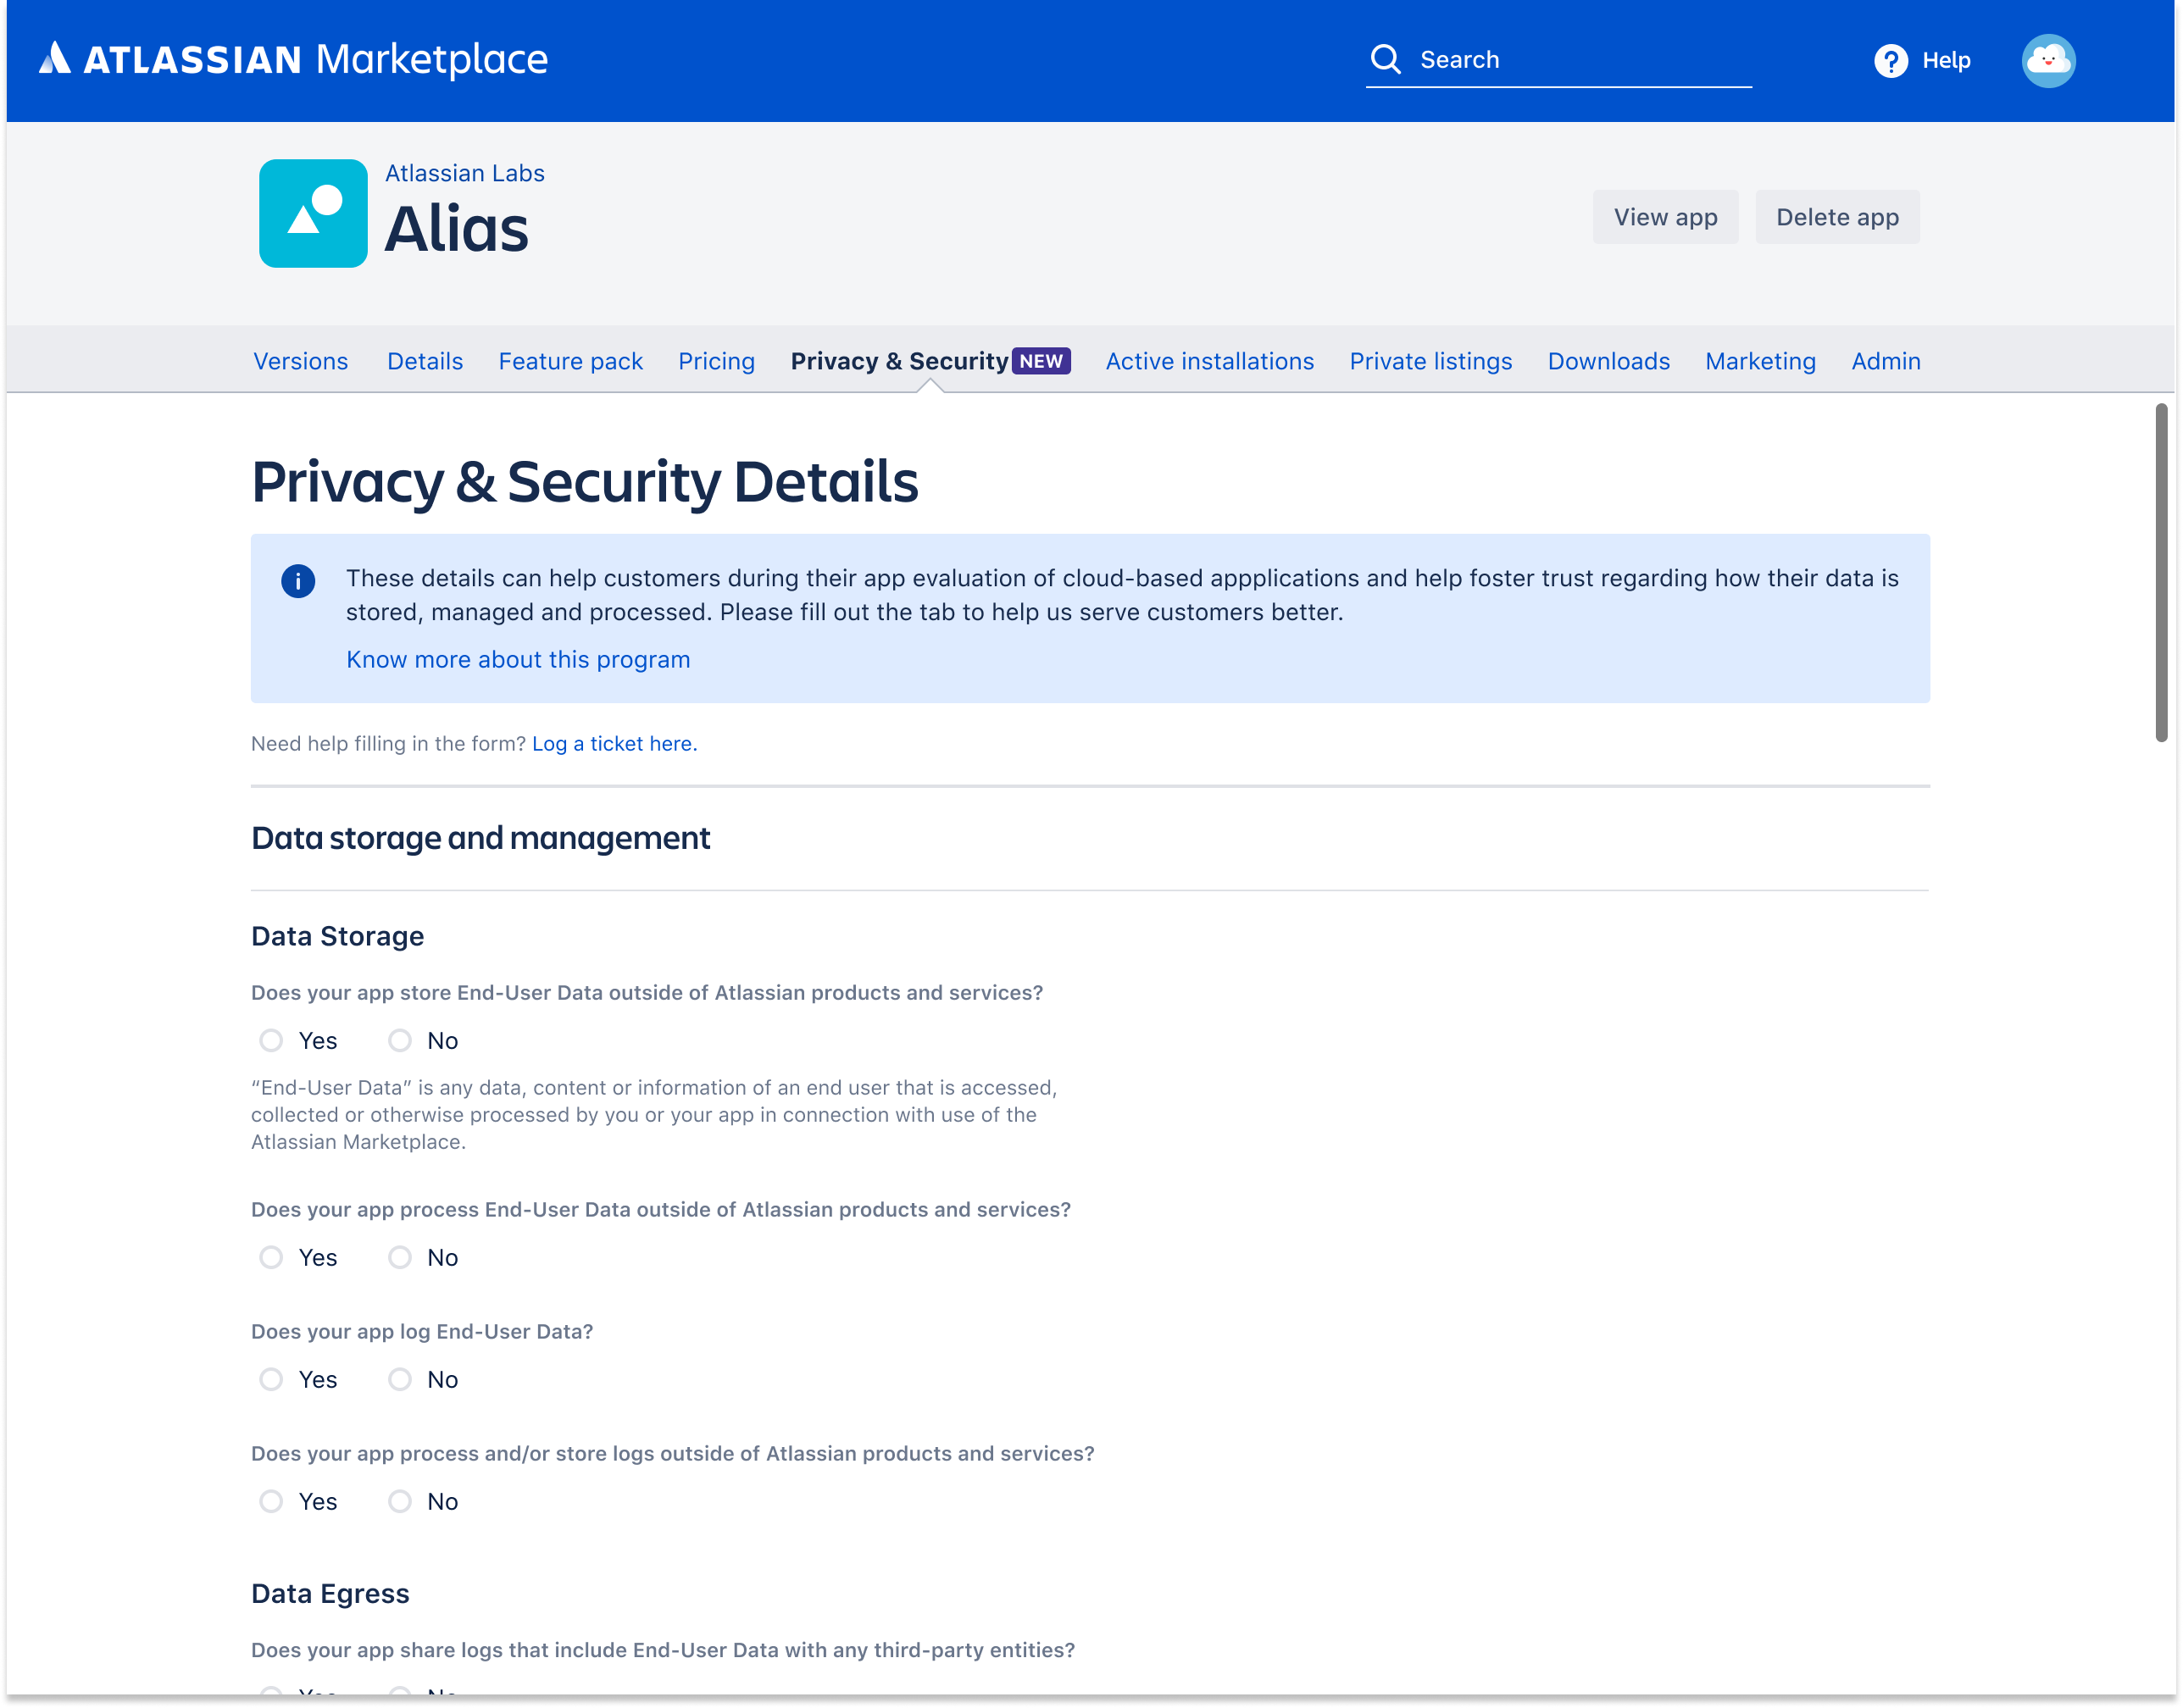 Privacy and Security details